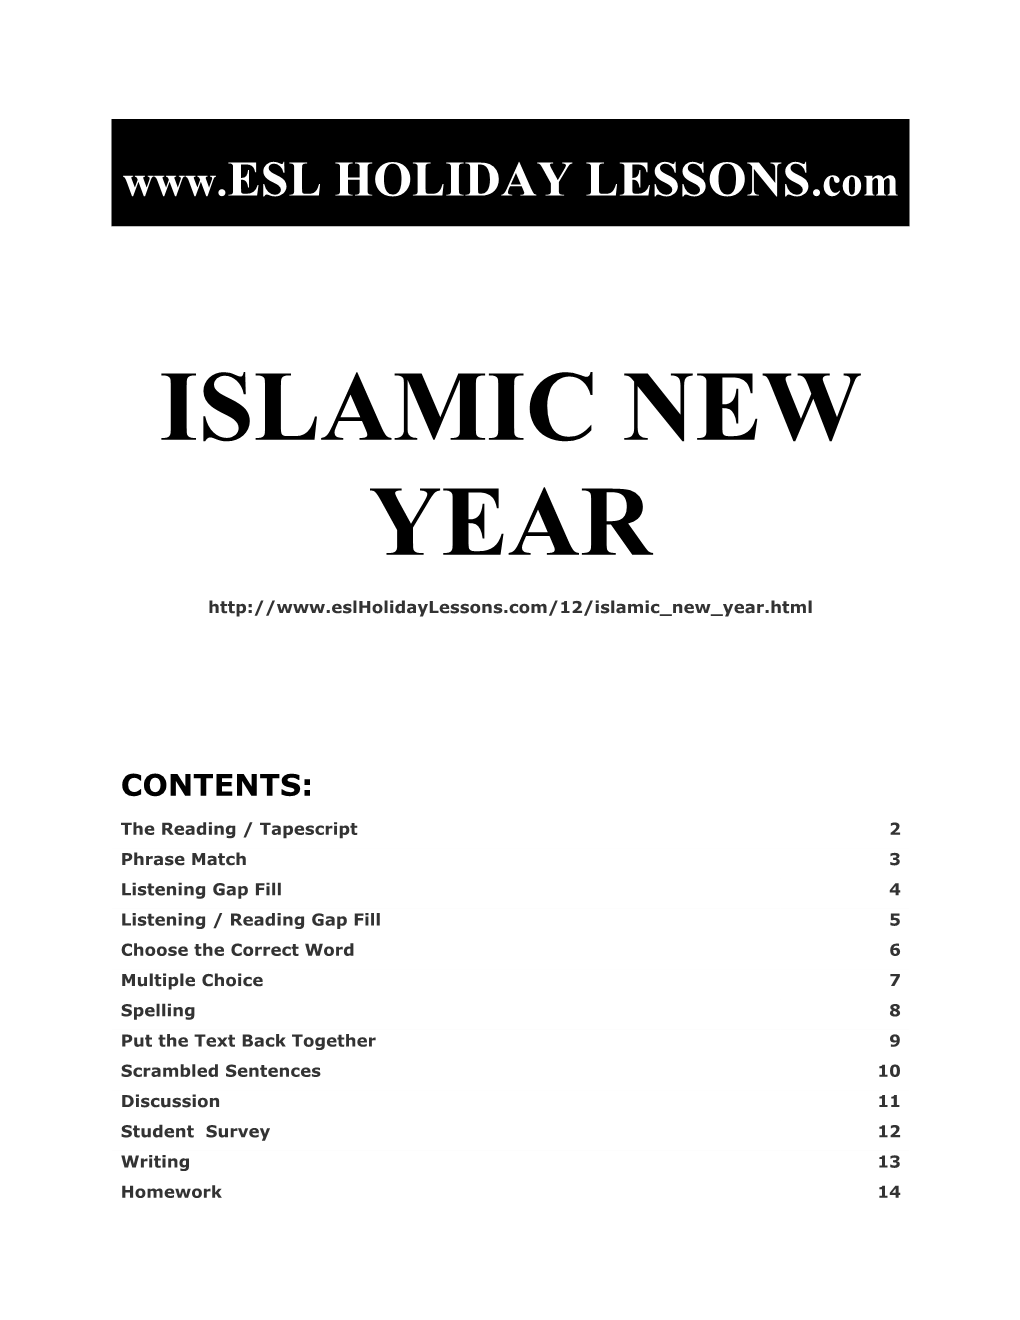 Holiday Lessons - Islamic New Year